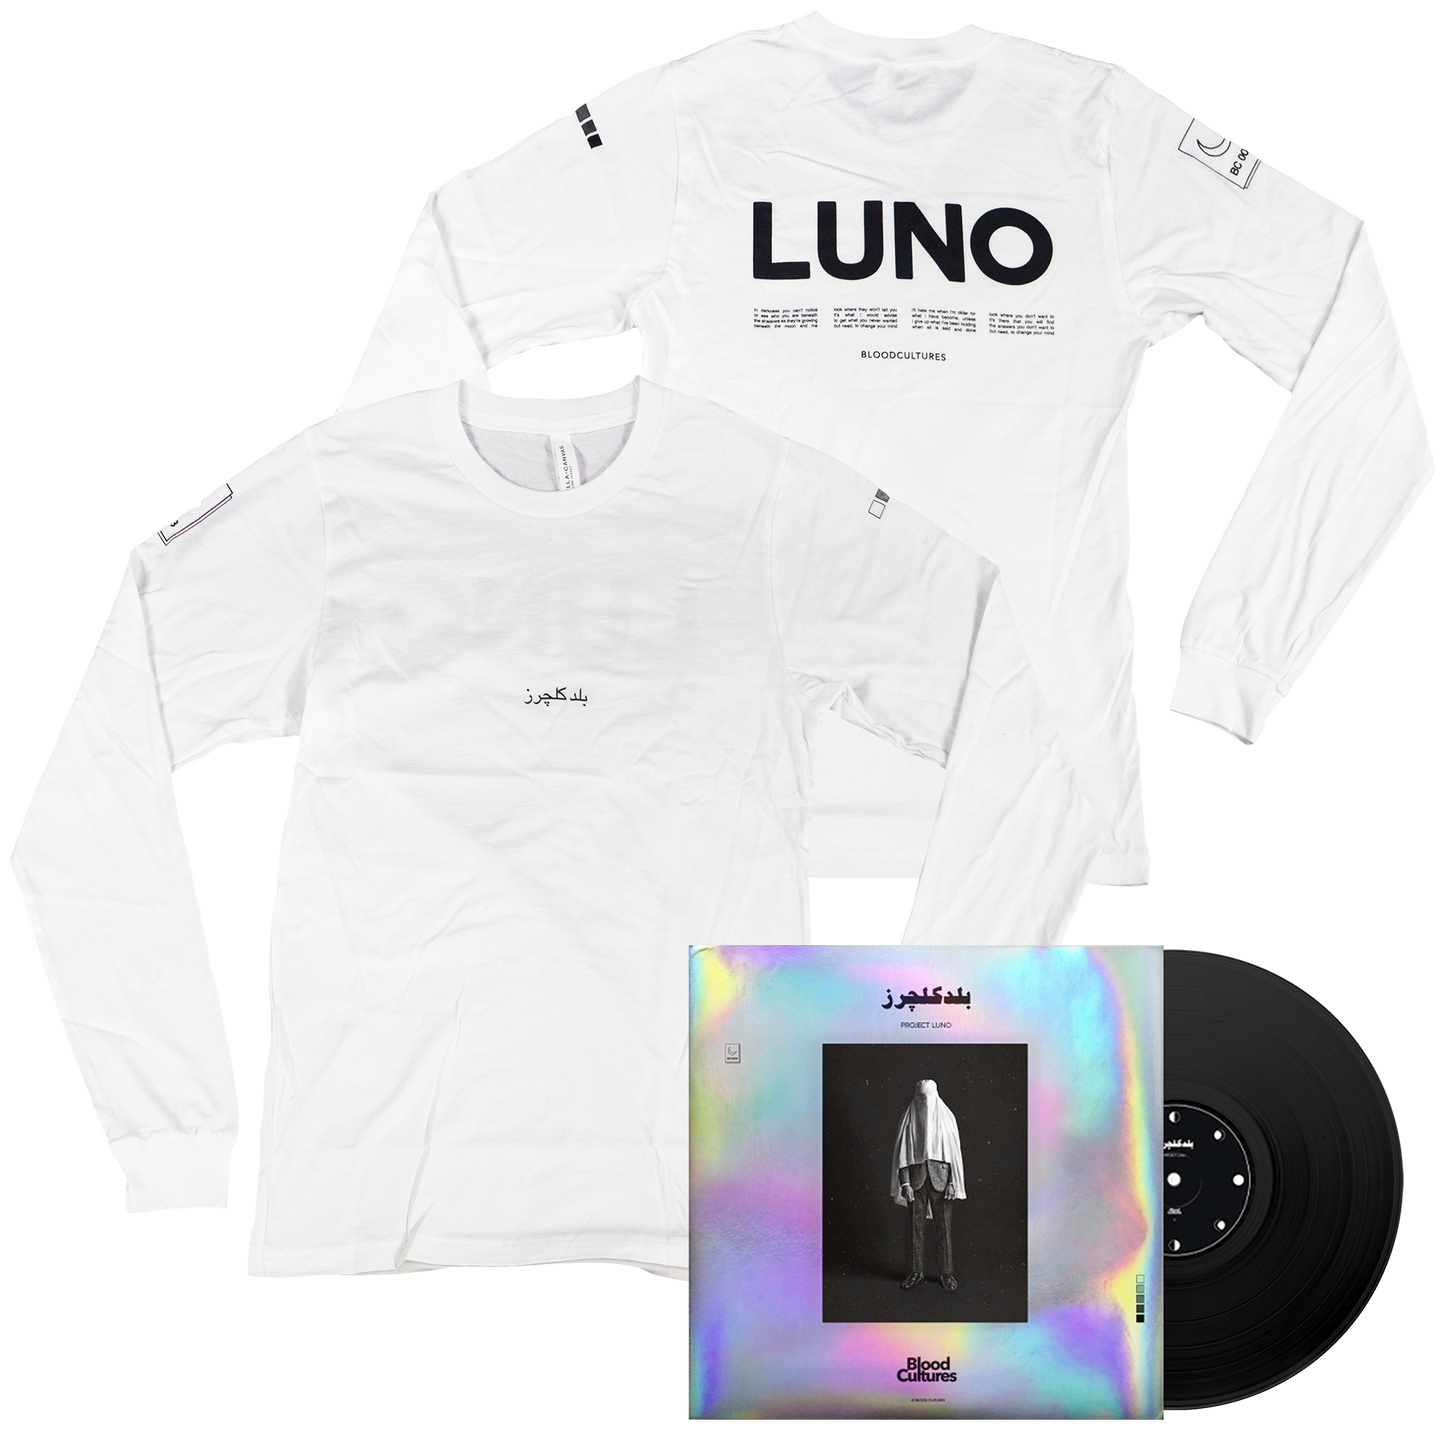 Blood Cultures - LUNO Vinyl (2nd Edition) + LUNO White Long Sleeve Bundle